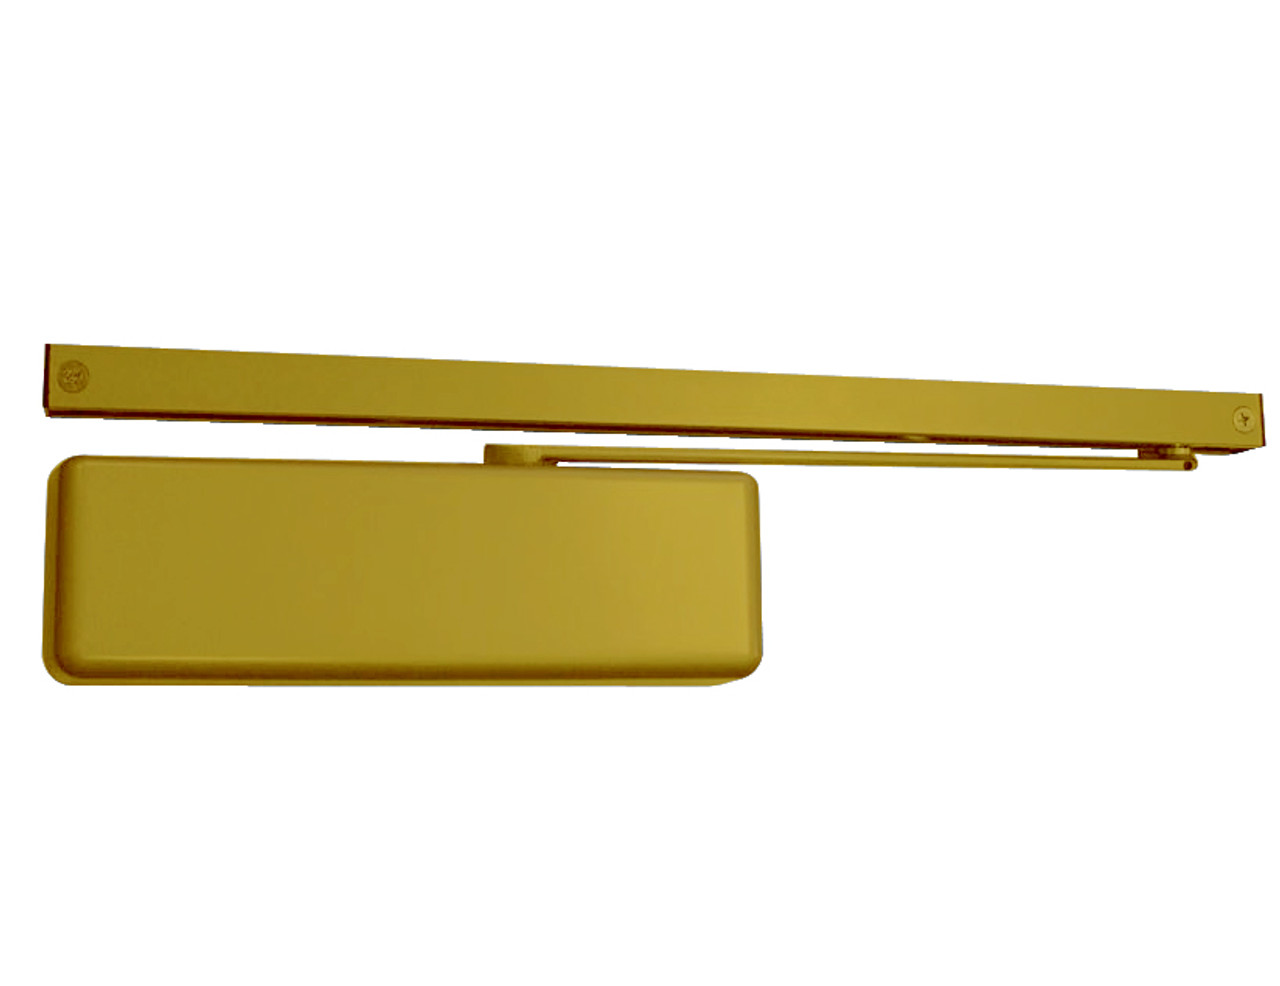 4040XPT-H-BUMPER-BRASS LCN Door Closer Hold Open Track with Bumper in Brass Finish